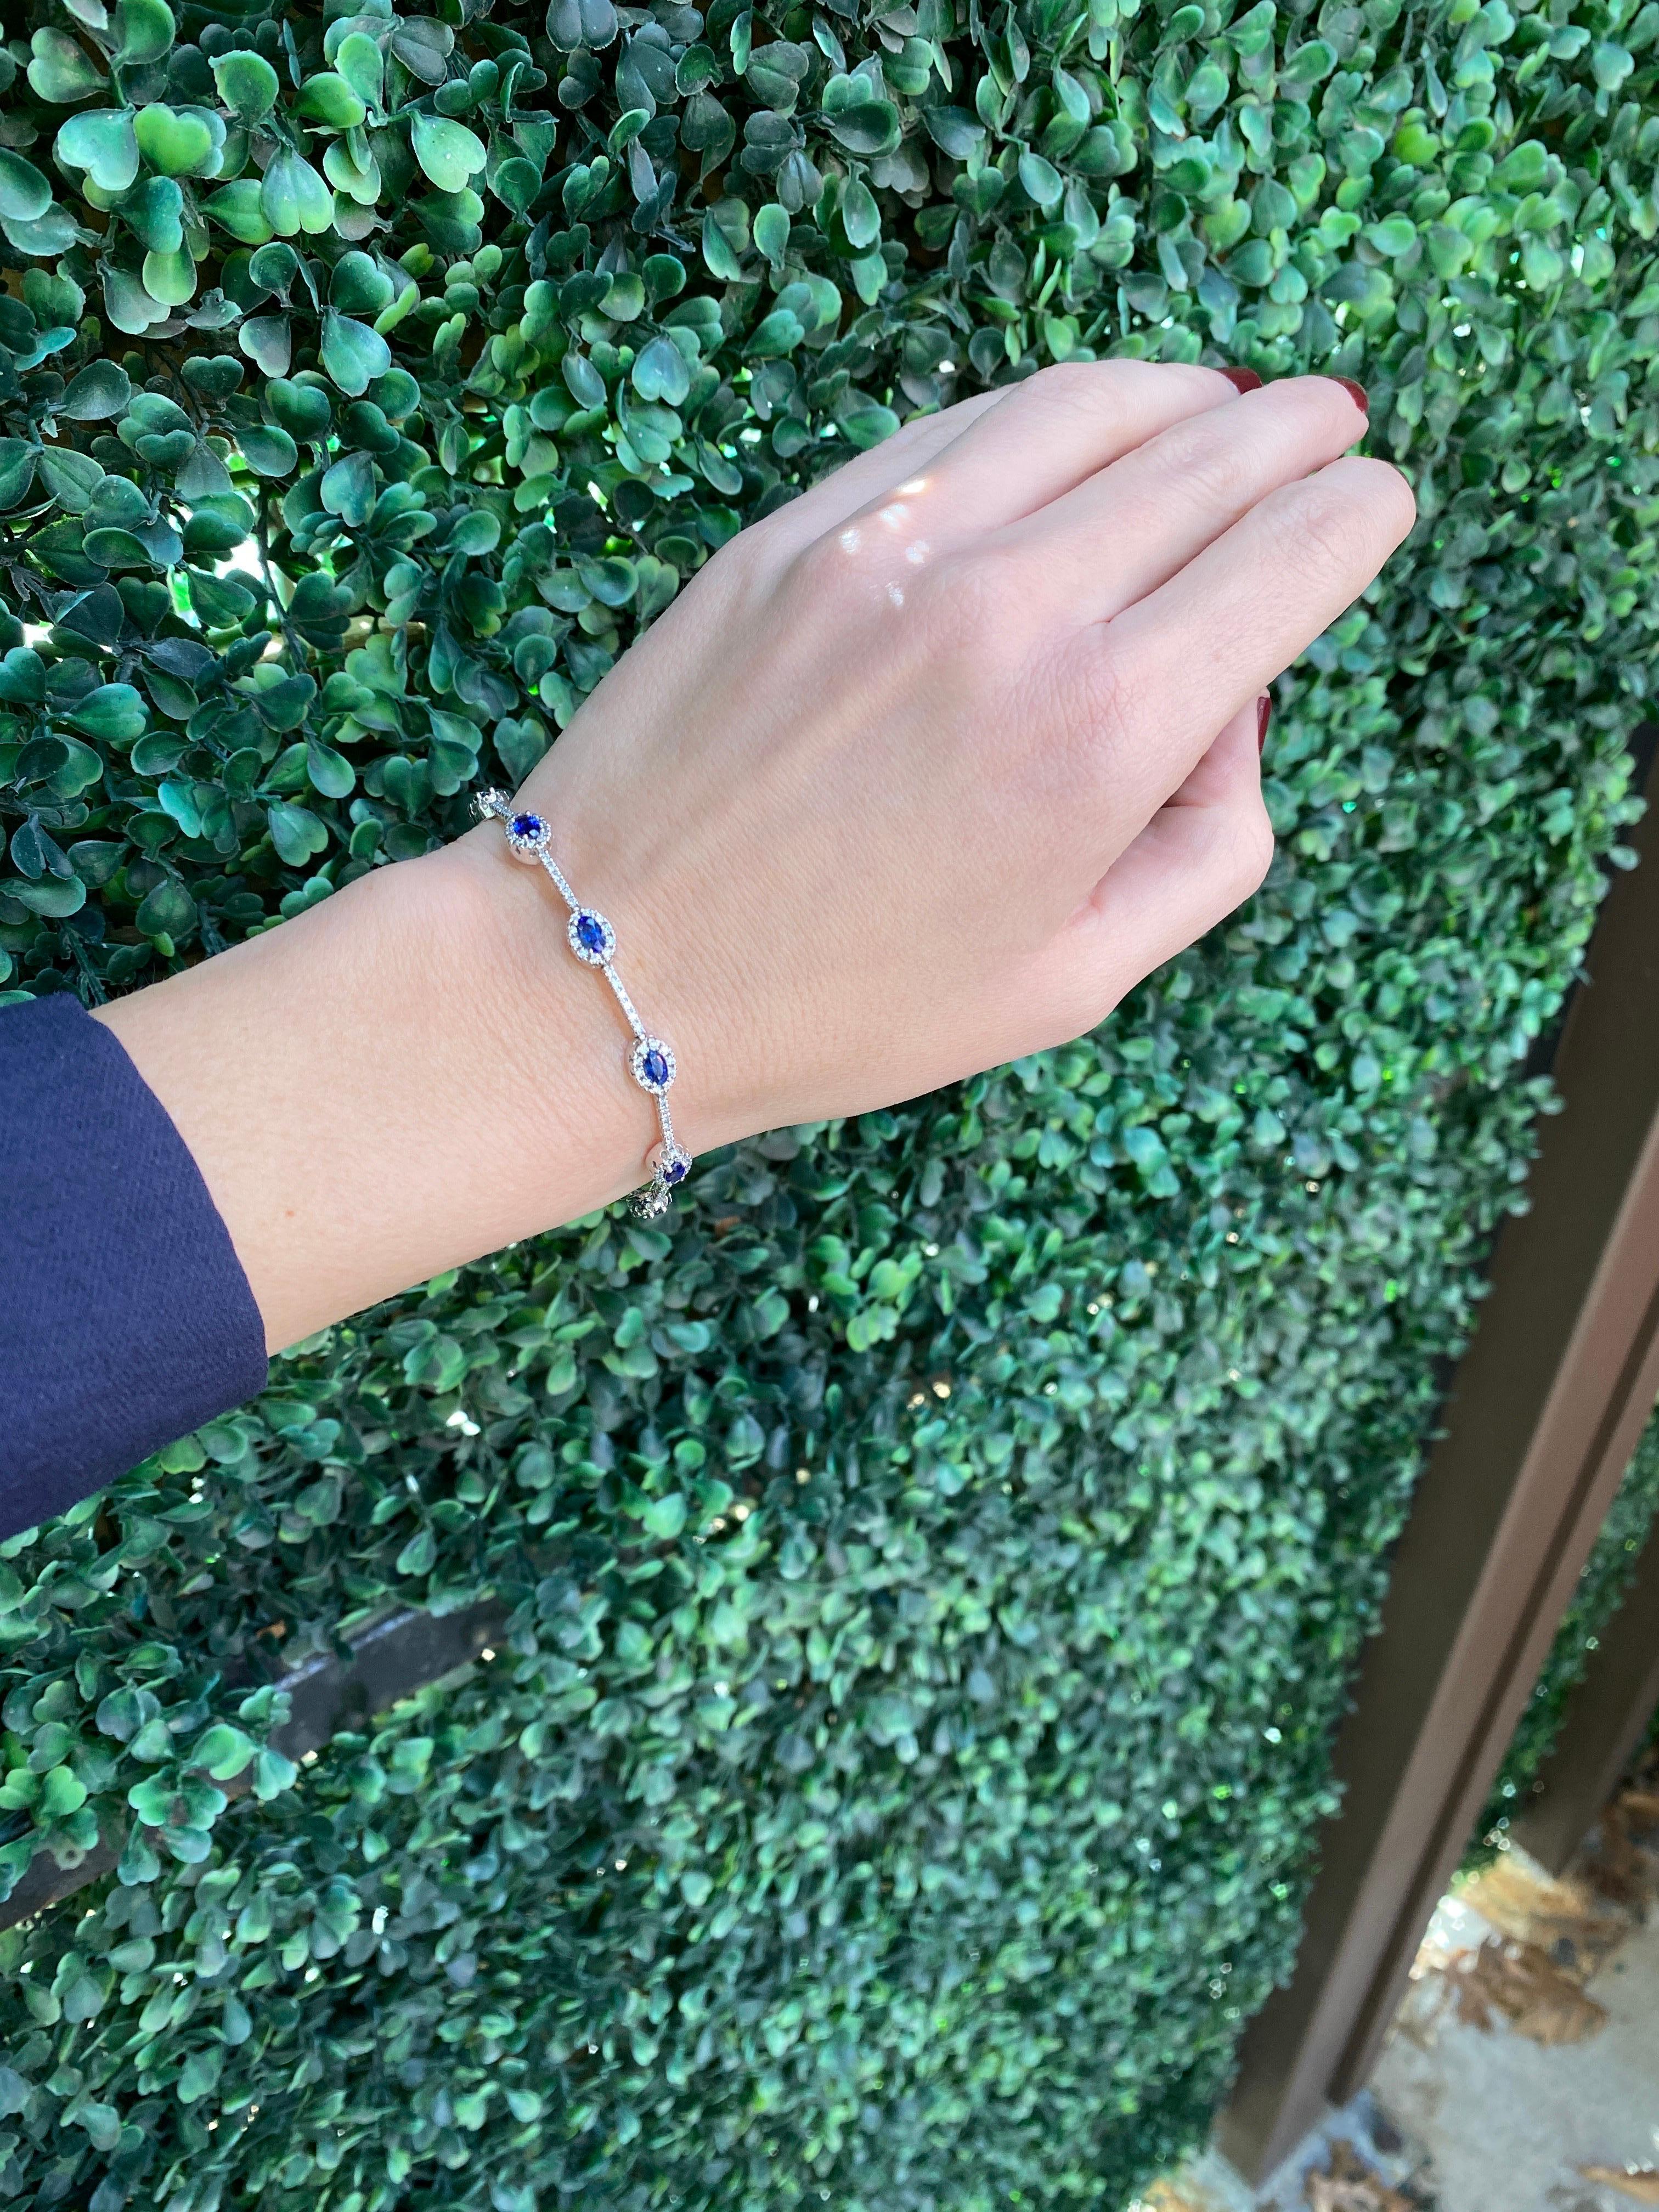 This bracelet features 2.15 carats of natural oval cut blue sapphires accented by 2.15 carat total weight in round diamonds set in 14 karat white gold. 
Measurements: Length is 7